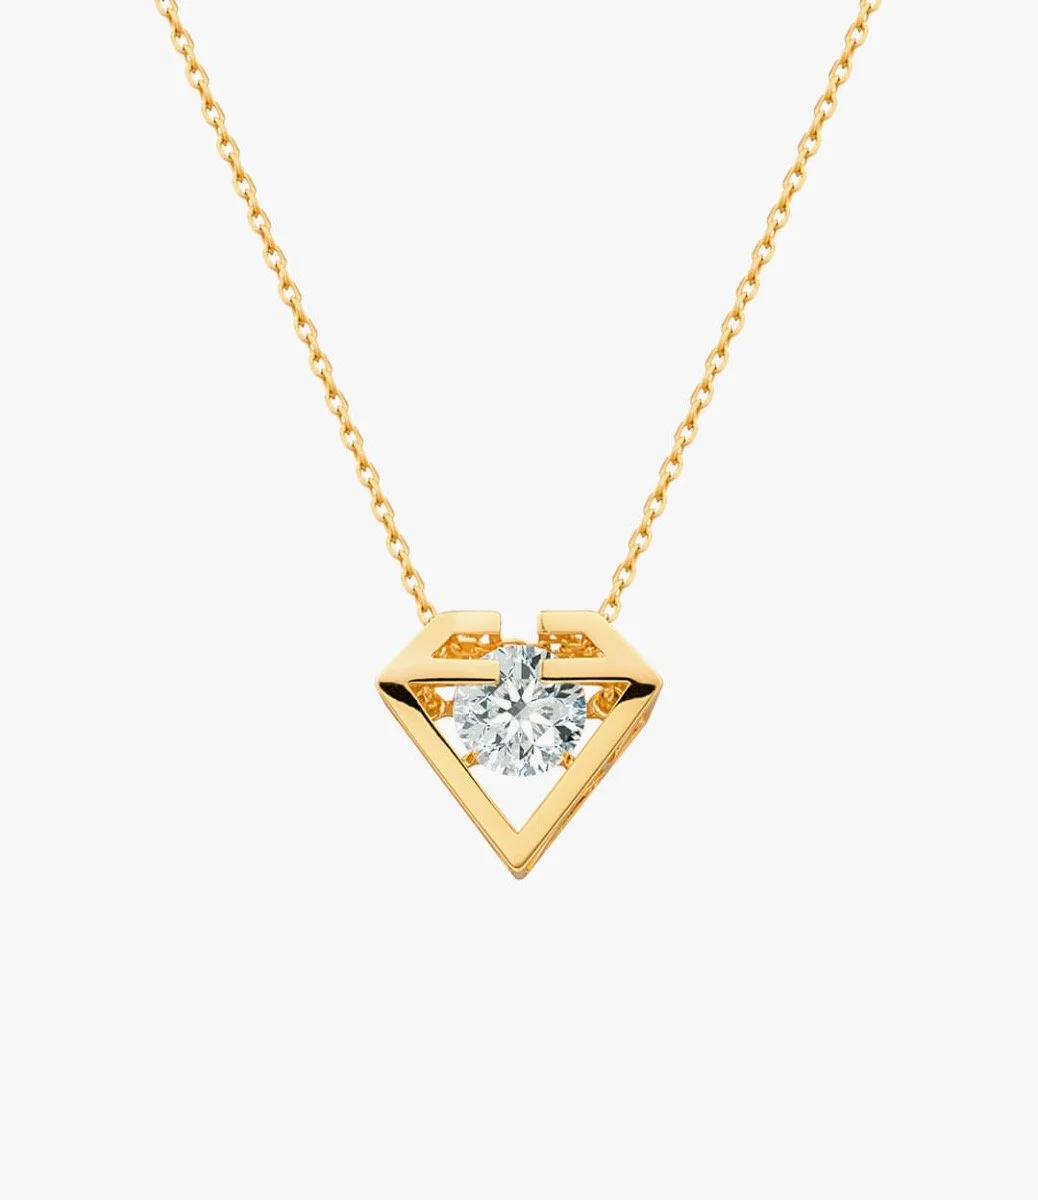 Gold-Plated Diamond-Shaped Necklace